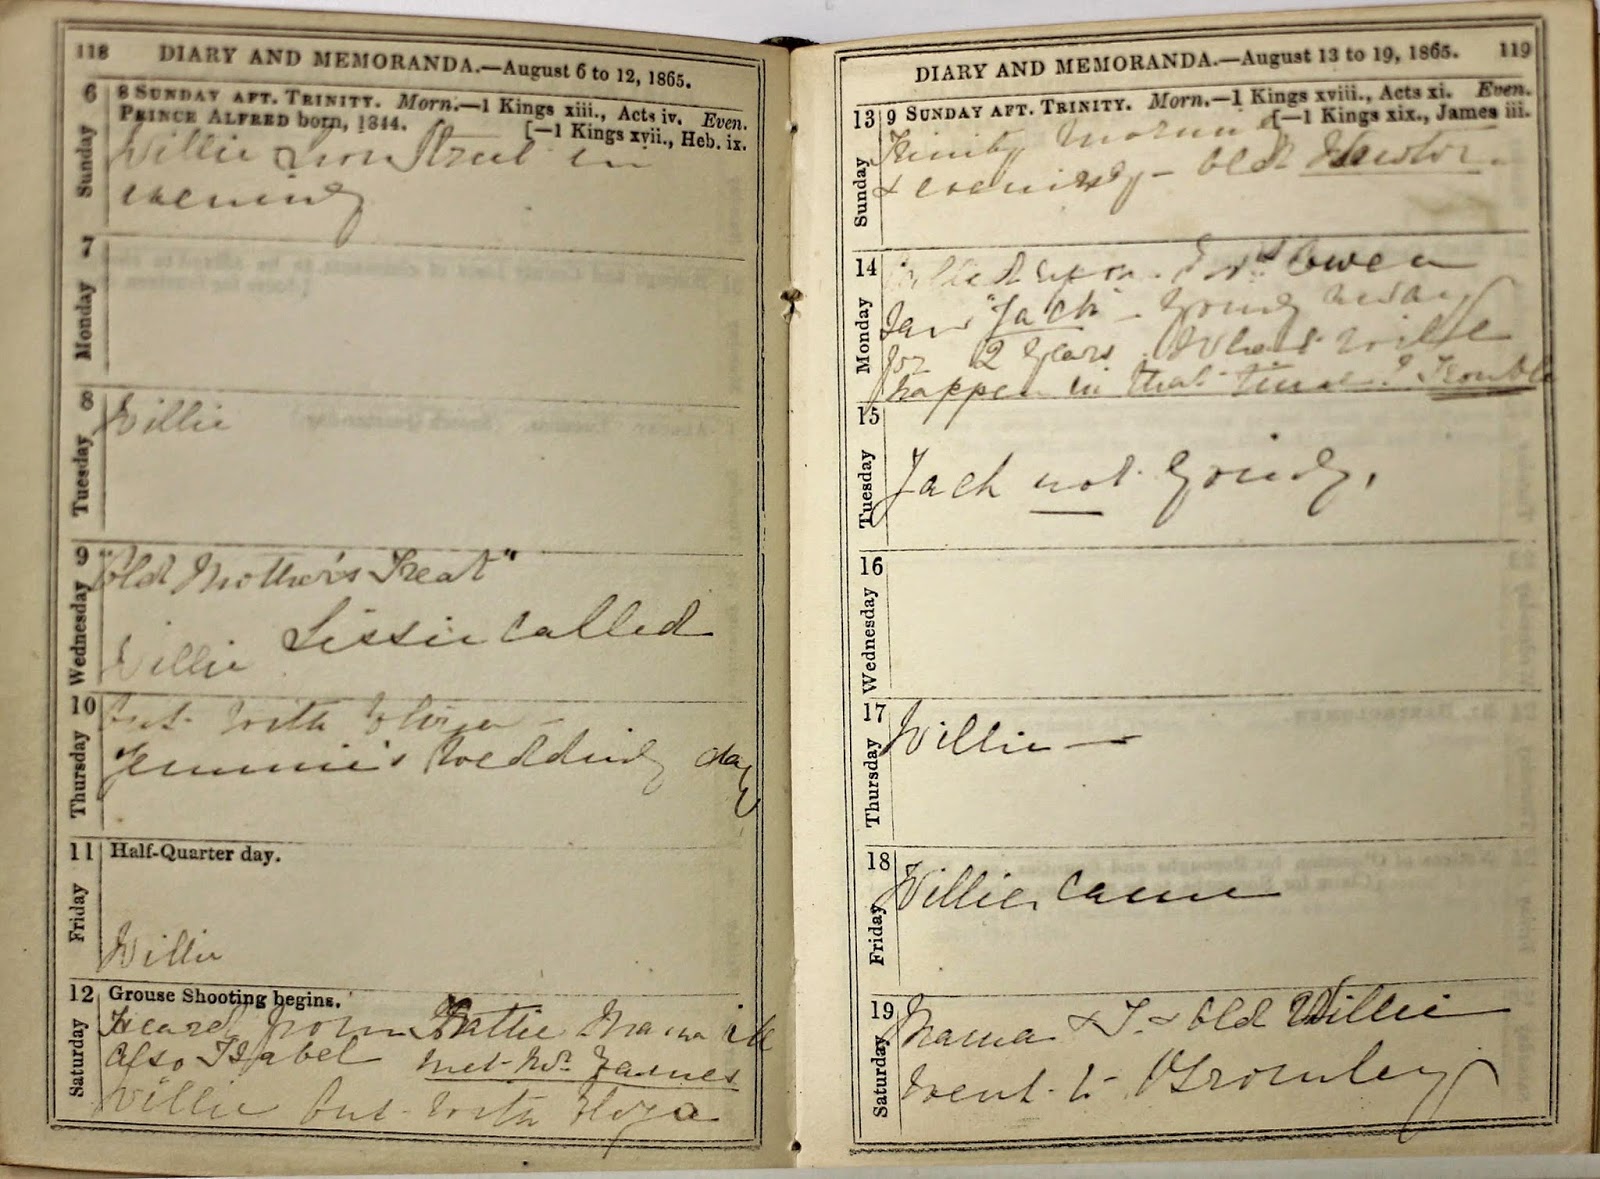 Two diary pages of Punch’s Pocket Book with the left page for August 6 to 12, 1865 and the right page for August 13 to 19,1865